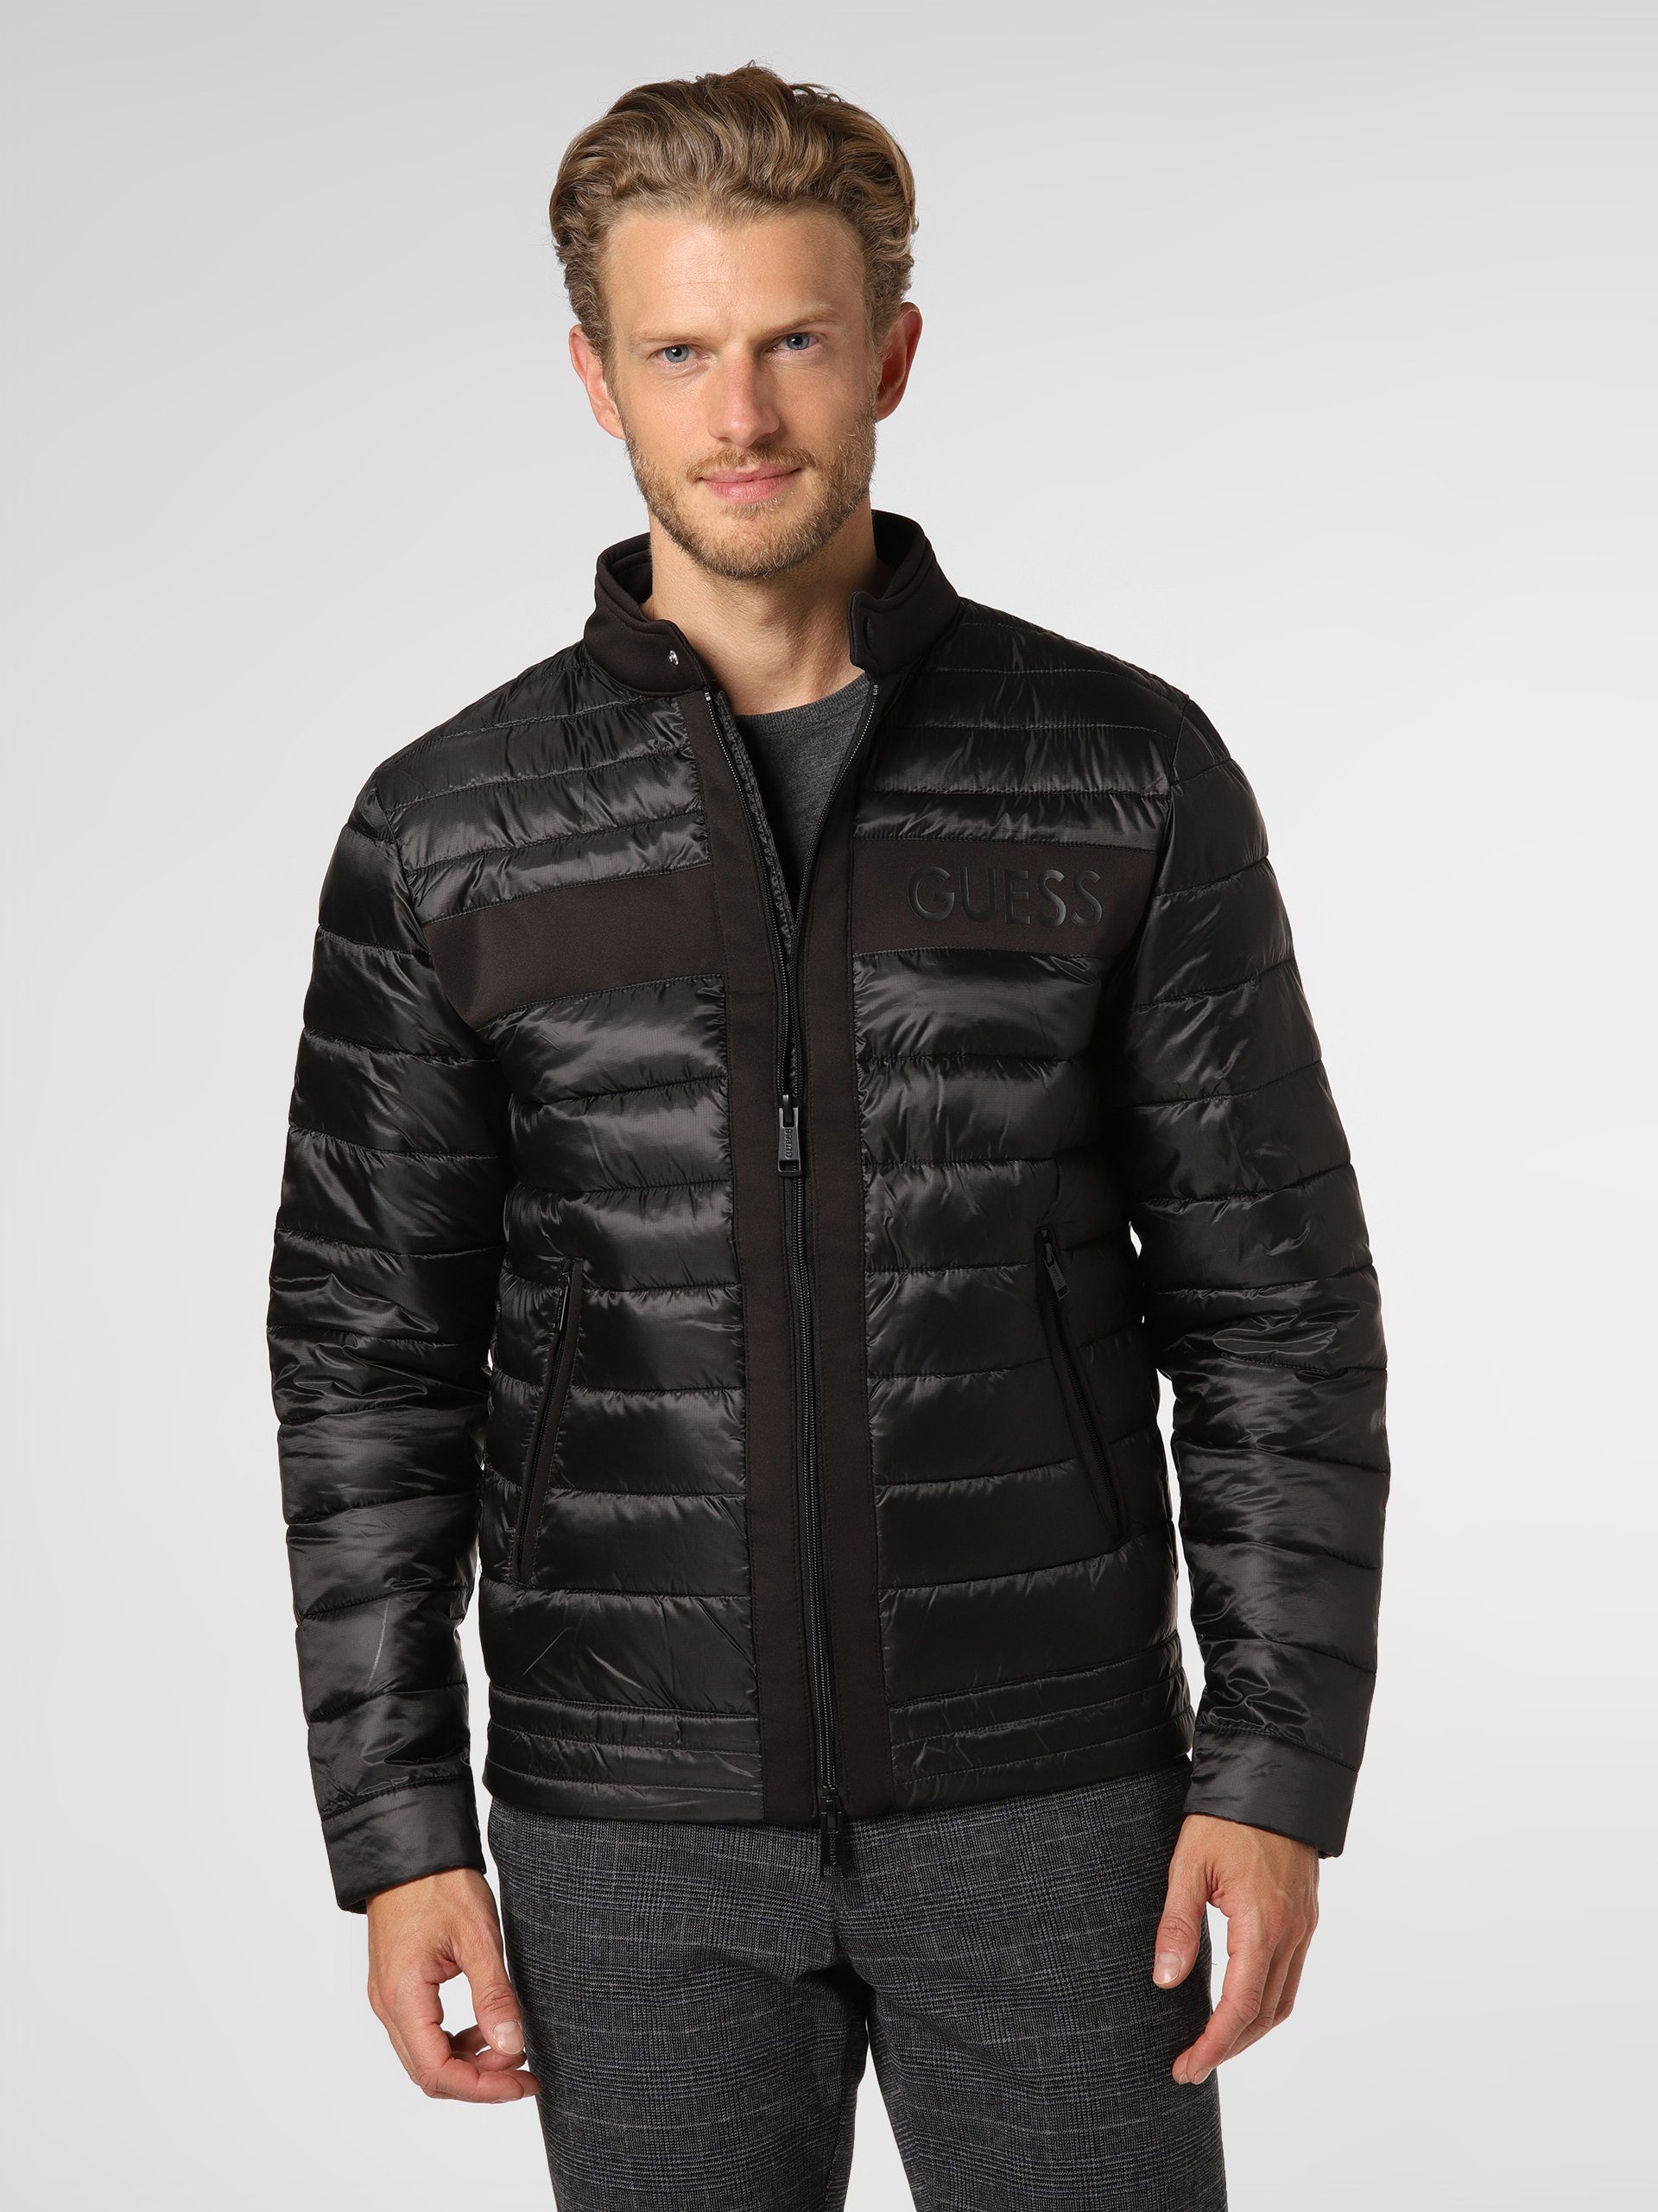 Guess Steppjacke, Normale Passform online kaufen | OTTO